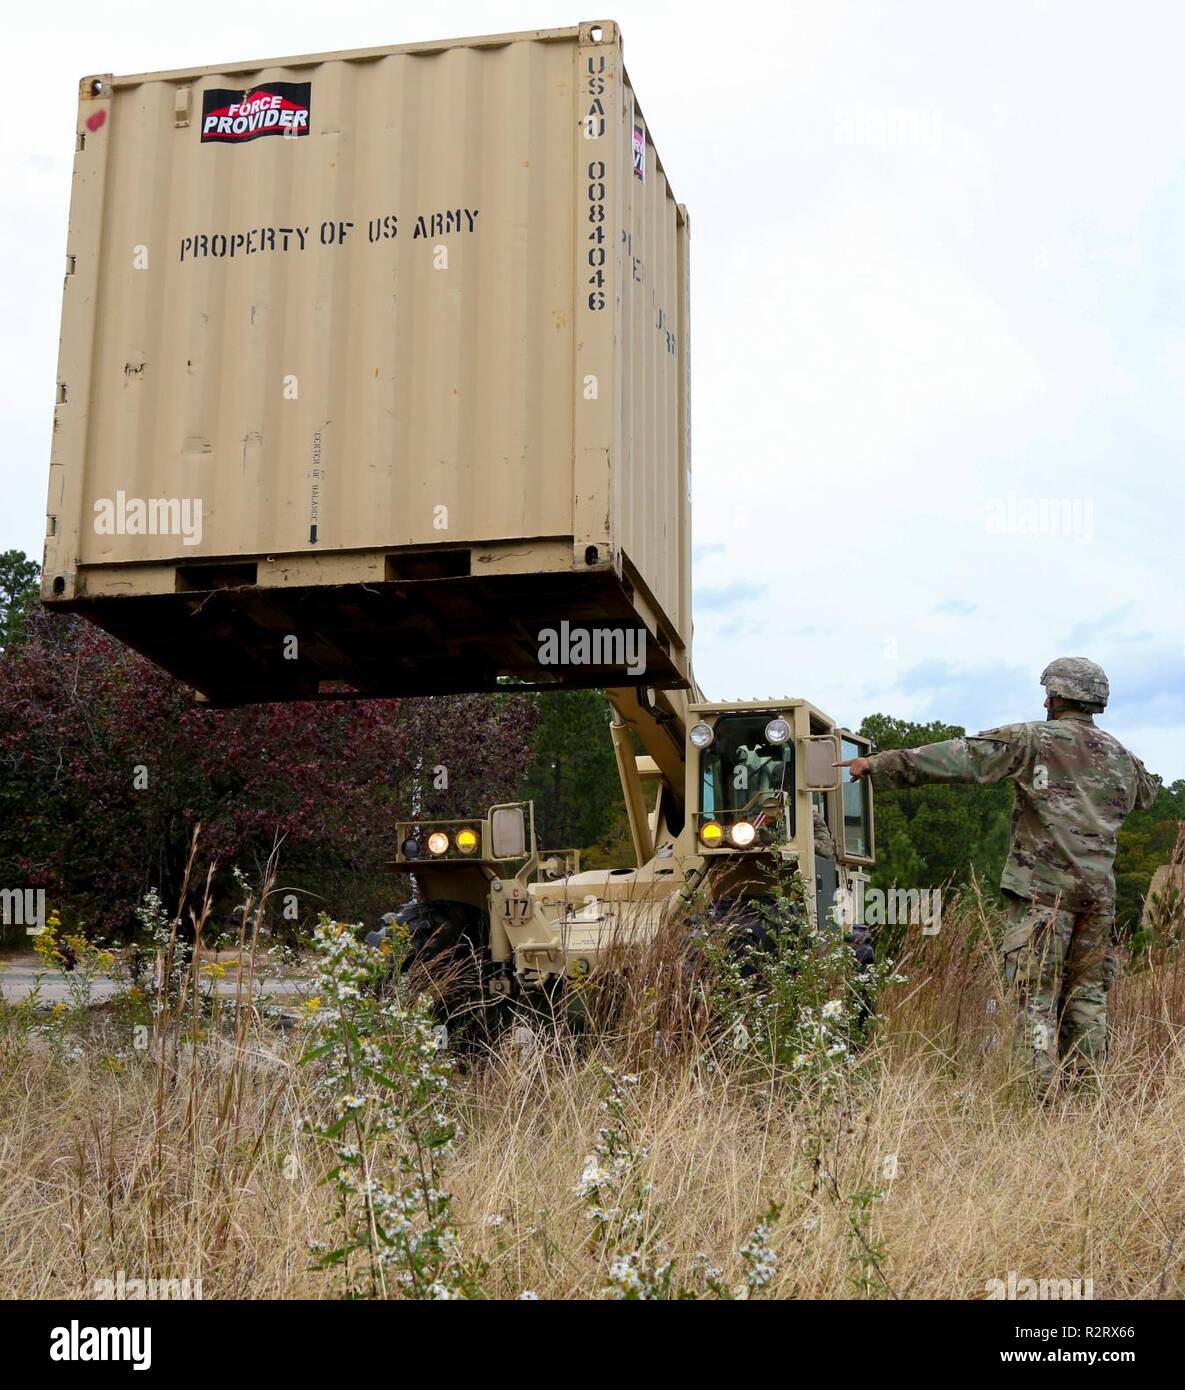 Spc. Steven Steedley (left), a 122nd Aviation Support Battalion, 82nd Combat Aviation Brigade, 82nd Airborne Division transportation specialist, moves a conex box with an All-Terrain Lifter, Army System II variable-reach forklift while Staff Sgt. Luis Gonzalez (right), a 122nd ASB, 82nd CAB, 82nd Abn. Div. transportation sergeant, ground guides on Nov. 1, 2018 at Fort Bragg, North Carolina. U.S. Northern Command is providing military support to the Department of Homeland Security and U.S. Customs and Border Protection to secure the southern border of the United States. Stock Photo